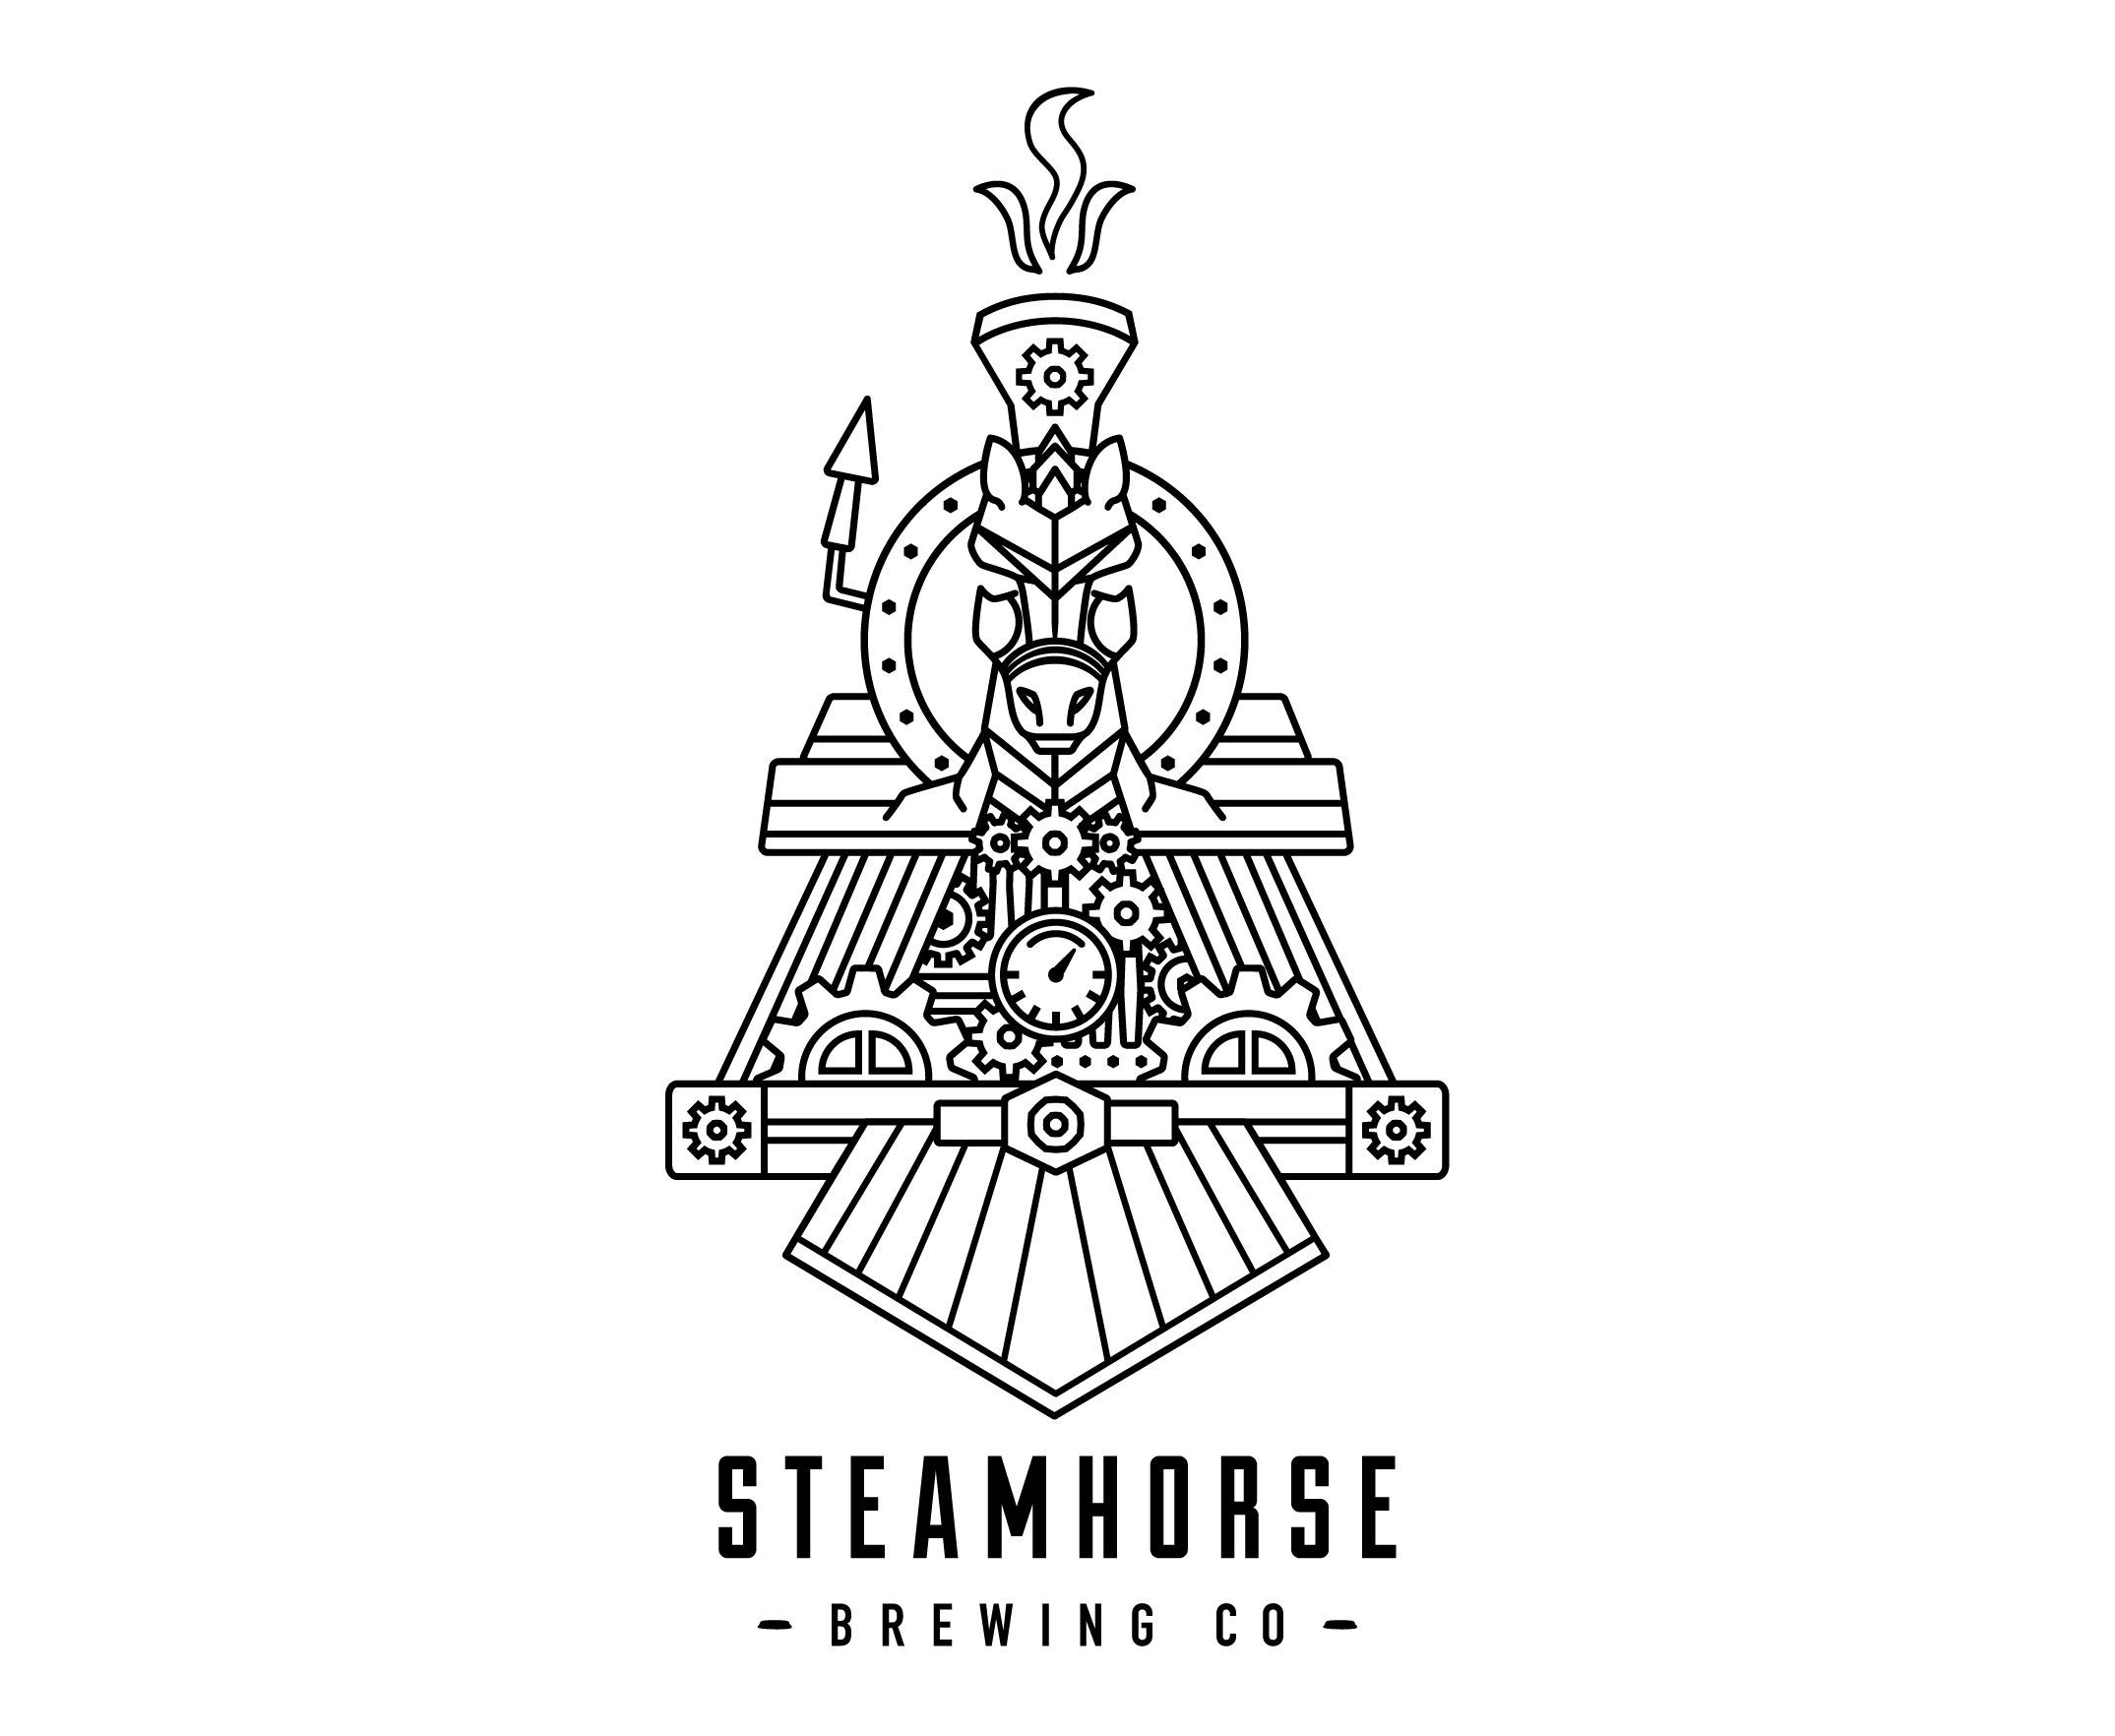 Steam Horse Brewing Co's illustrative logo was designed as a hybrid of a steam train and horse, with a condensed structural san serif typeface below.